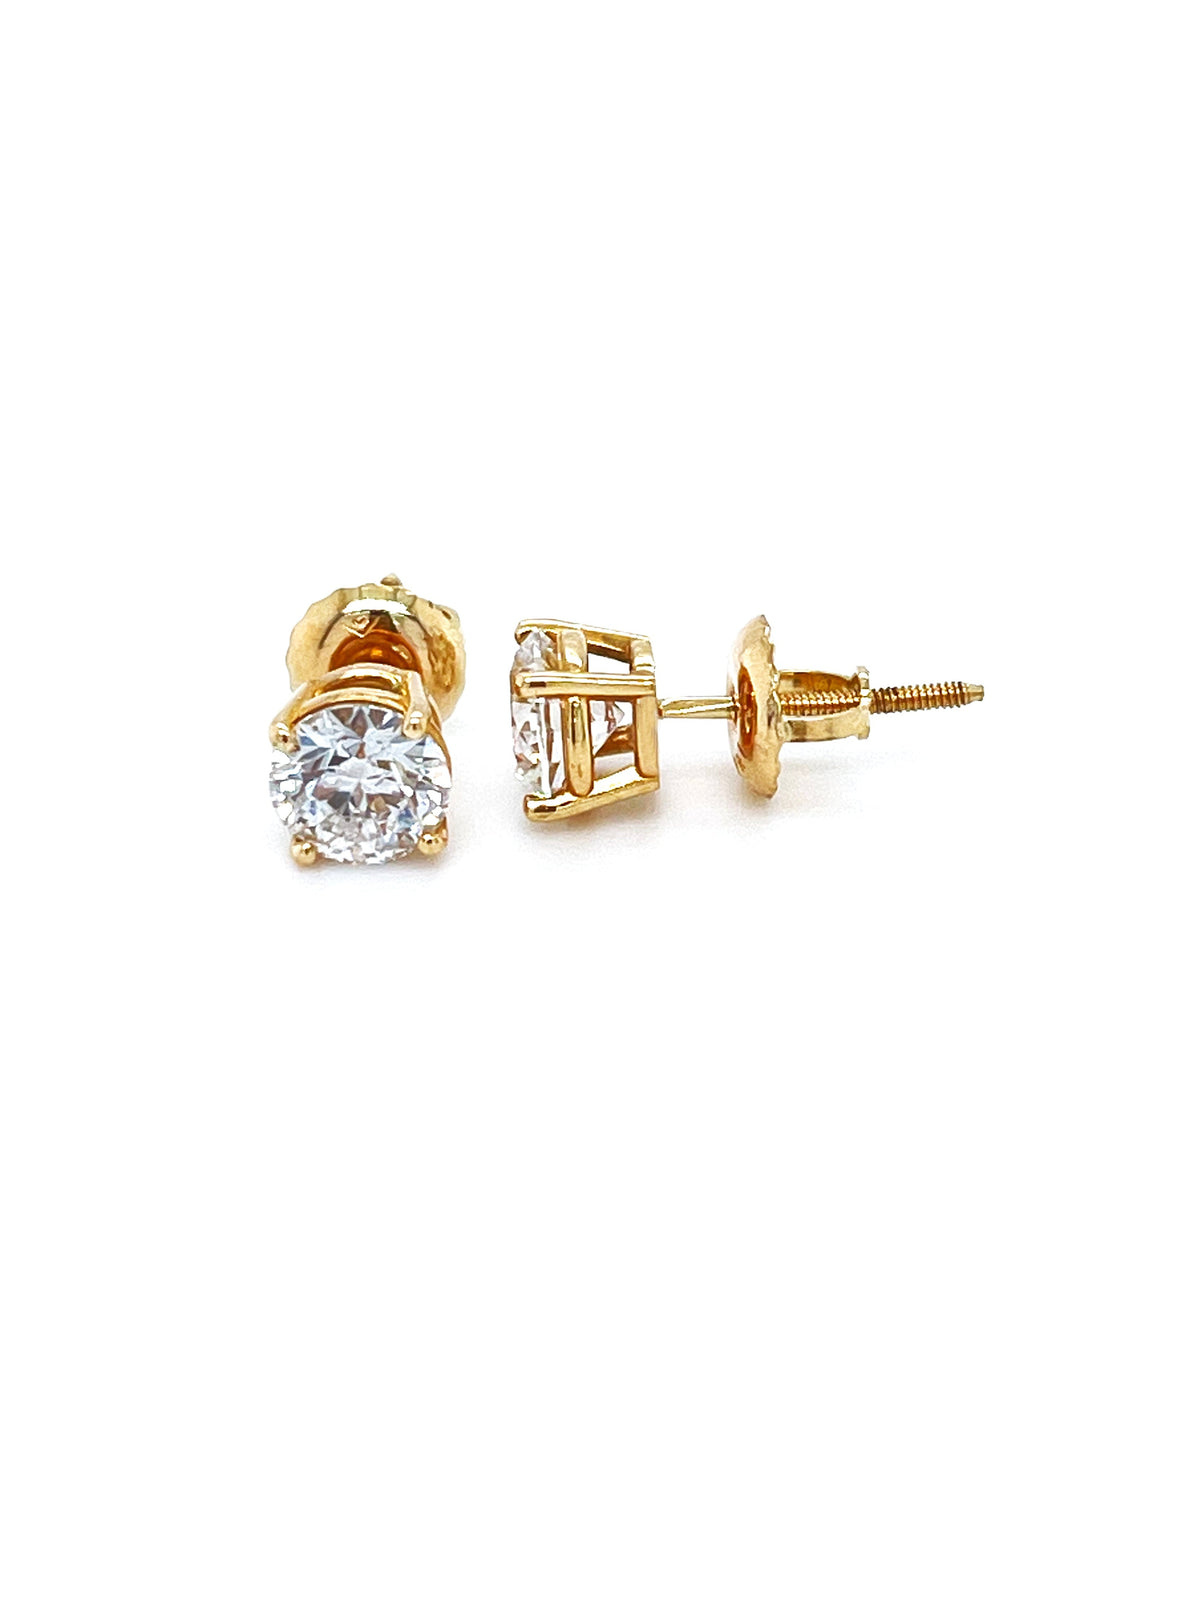 14K Yellow Gold 1.0TDW Lab Grown Round Diamond Solitaire Stud Earrings